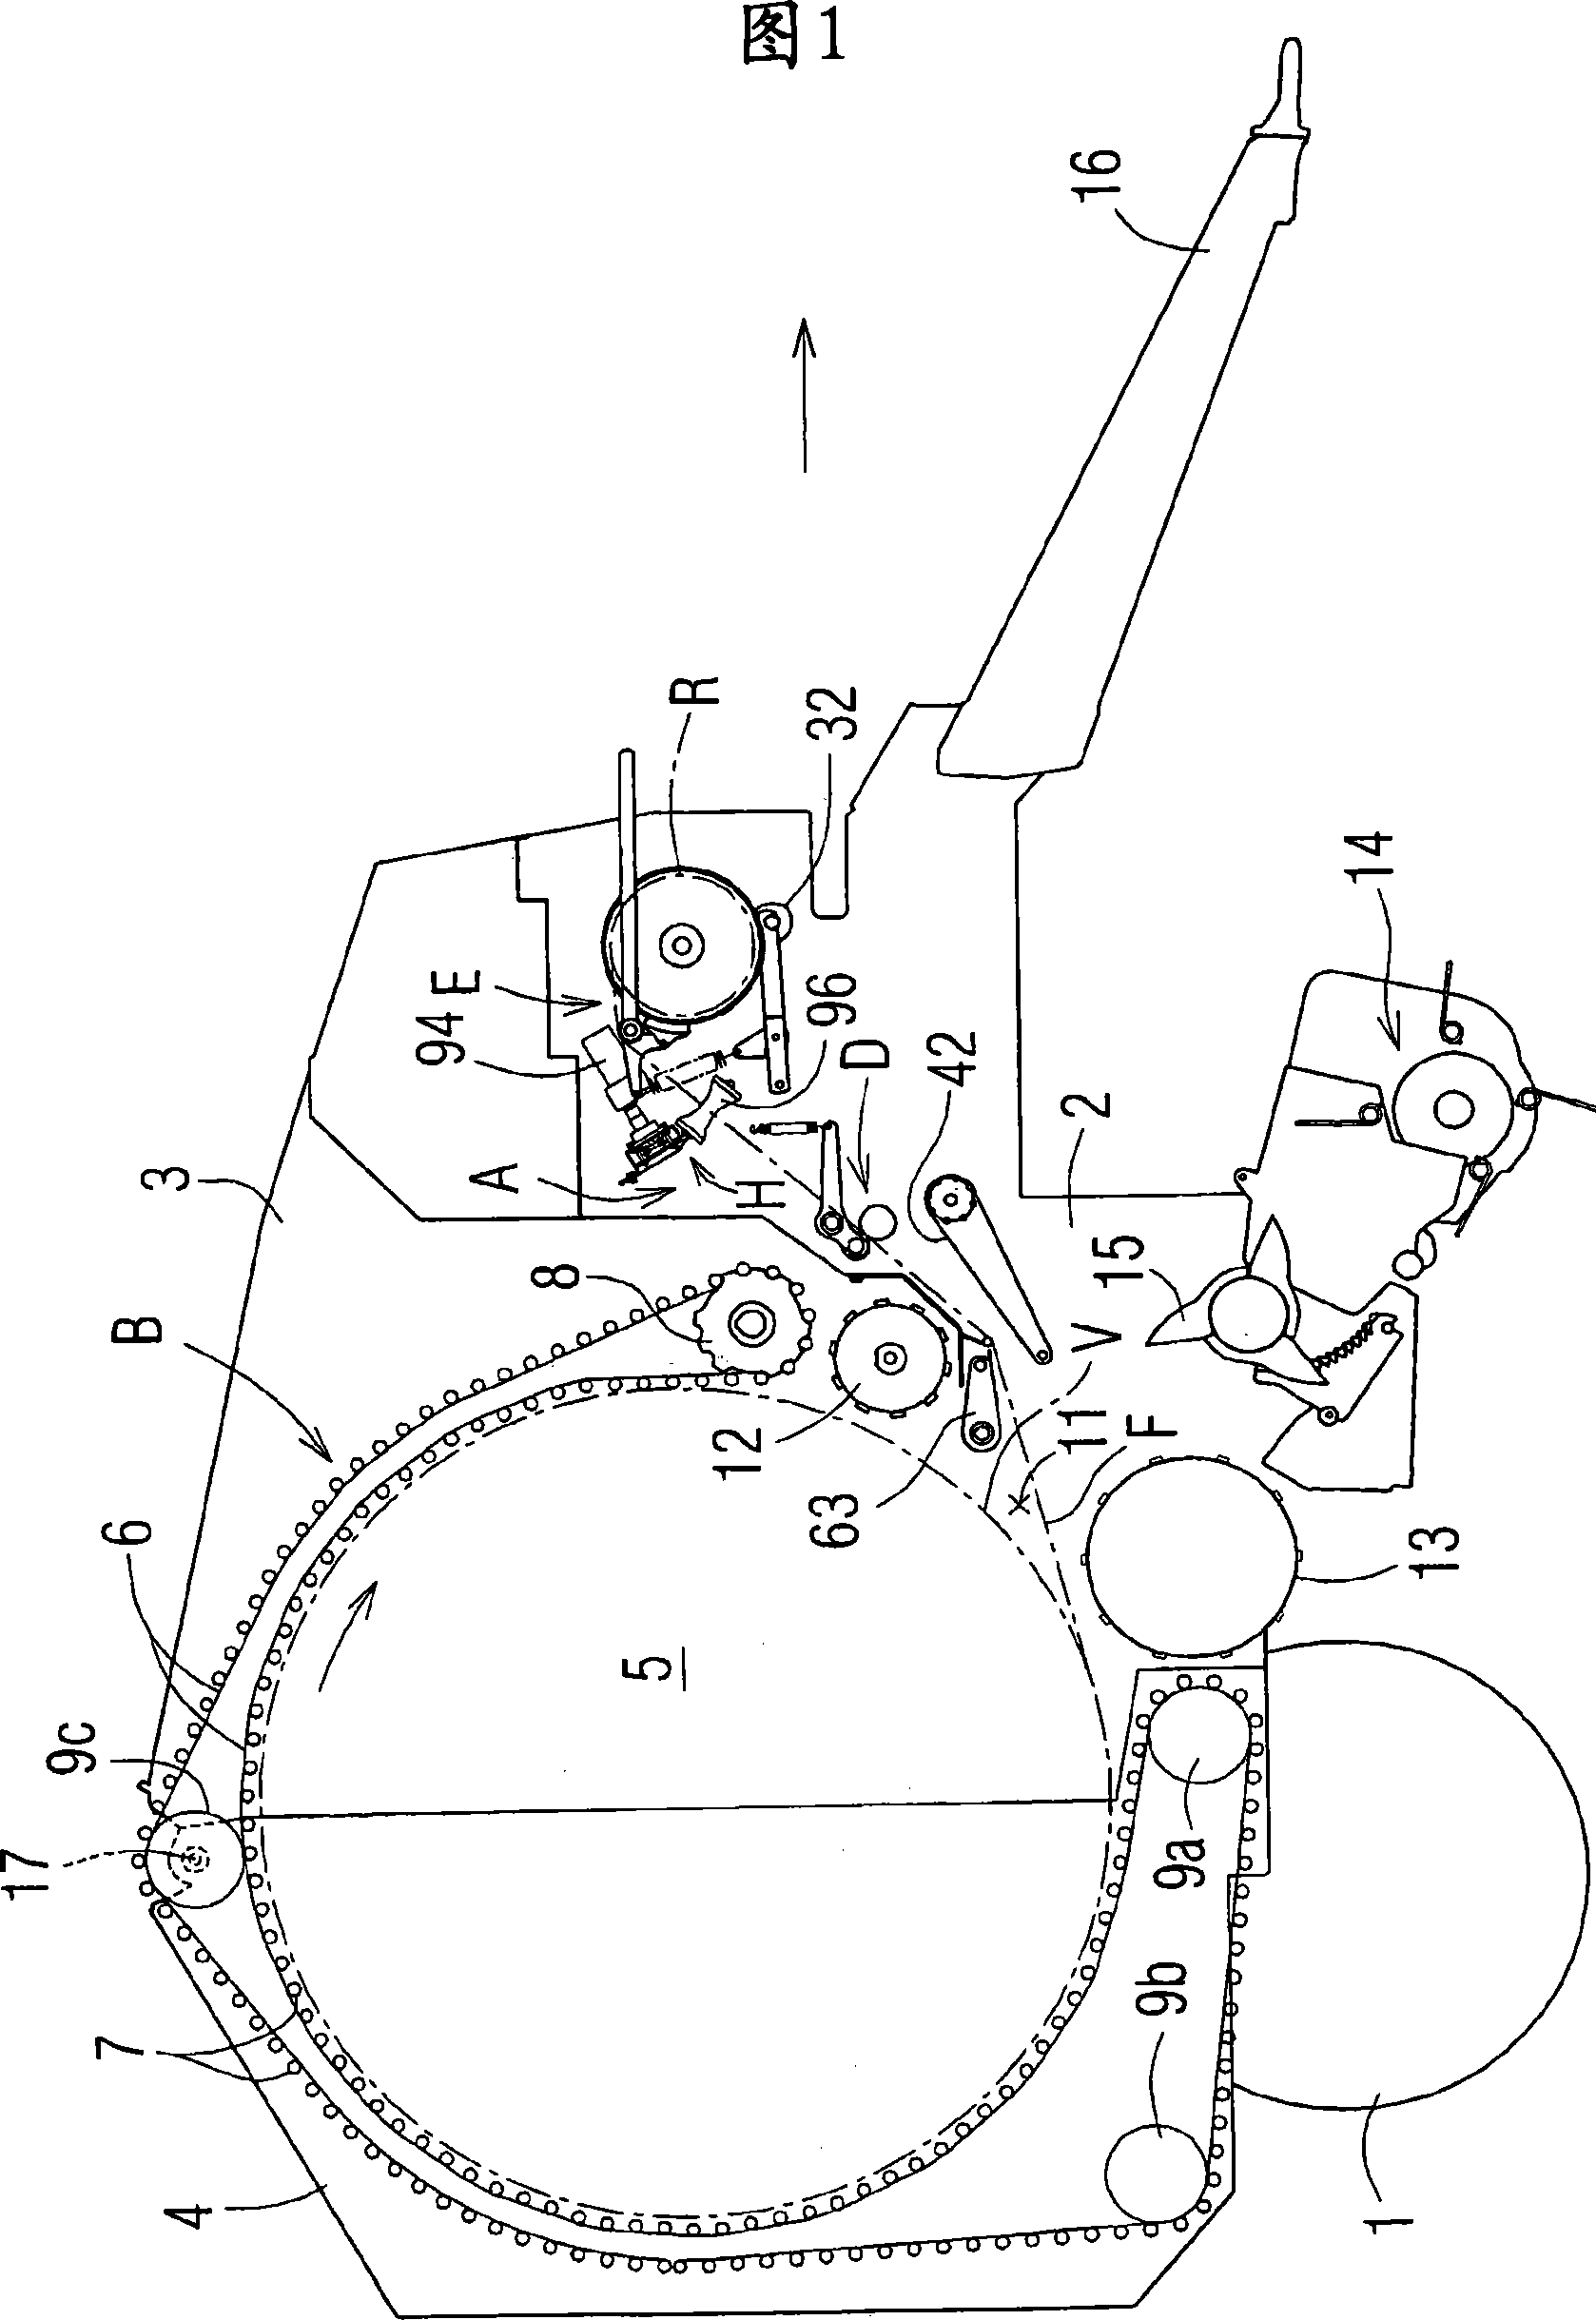 Film letting-off device for roll baler, and method for winding film on rolled bale